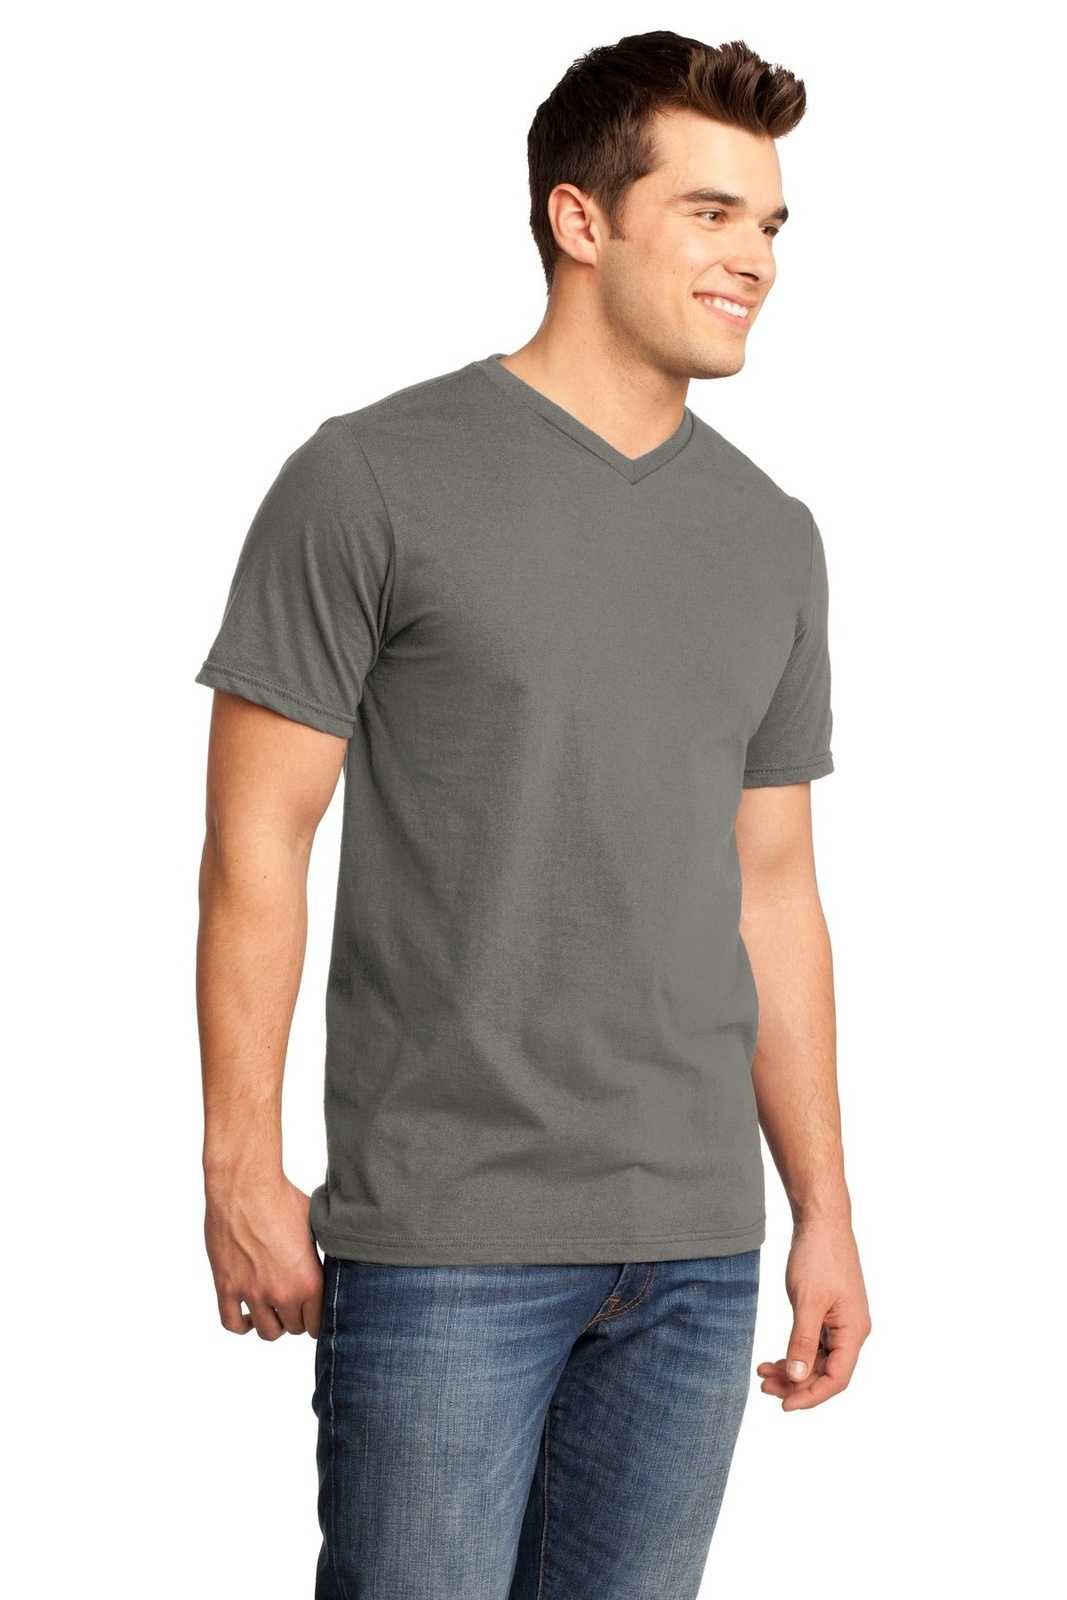 District DT6500 Very Important Tee V-Neck - Gray - HIT a Double - 4